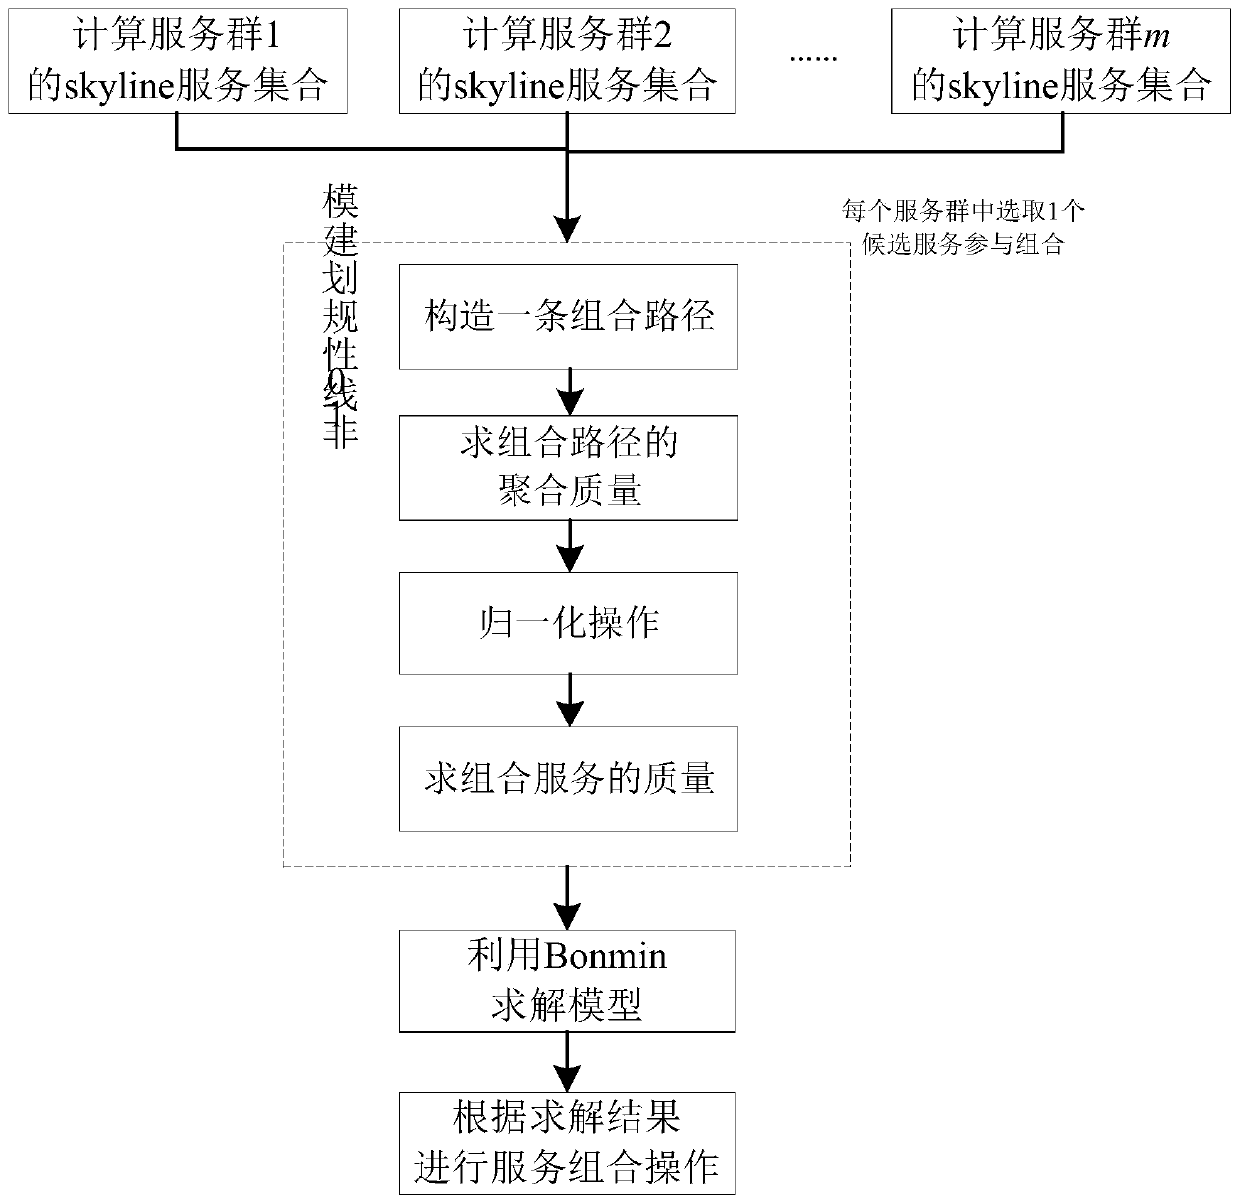 A Nonlinear Service Composition Method Based on Skyline Computing